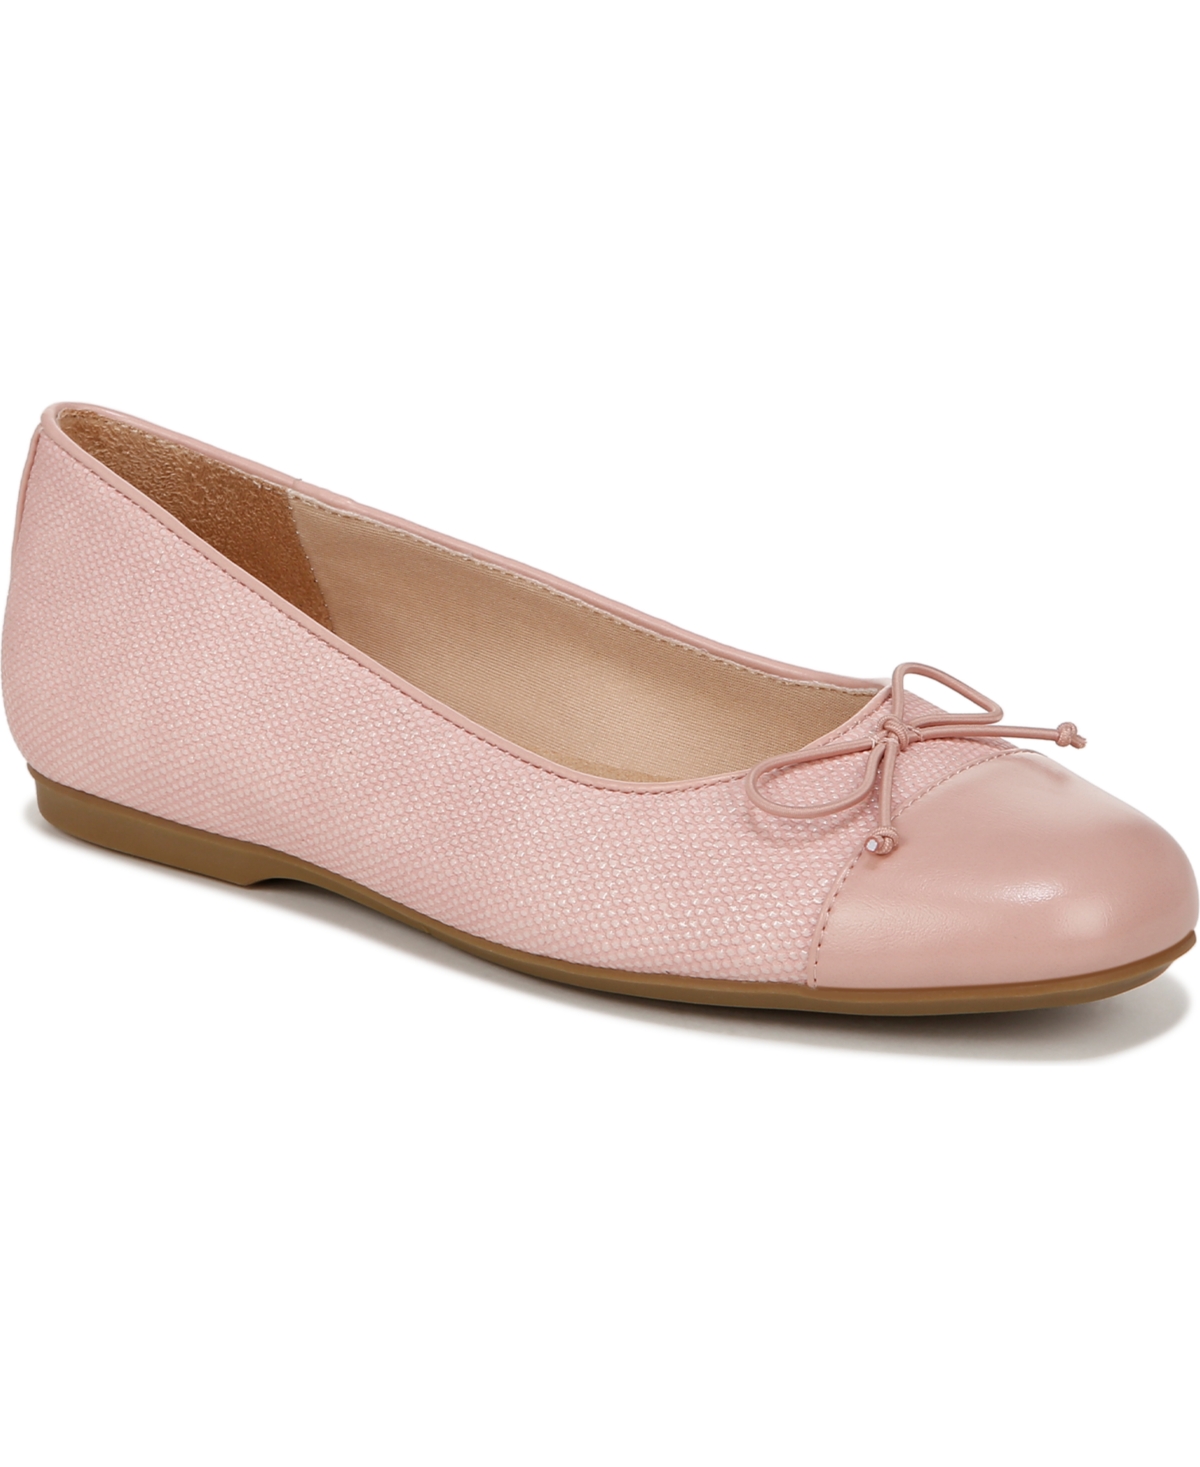 Dr. Scholl's Women's Wexley Bow Flats In Rose Pink Faux Leather